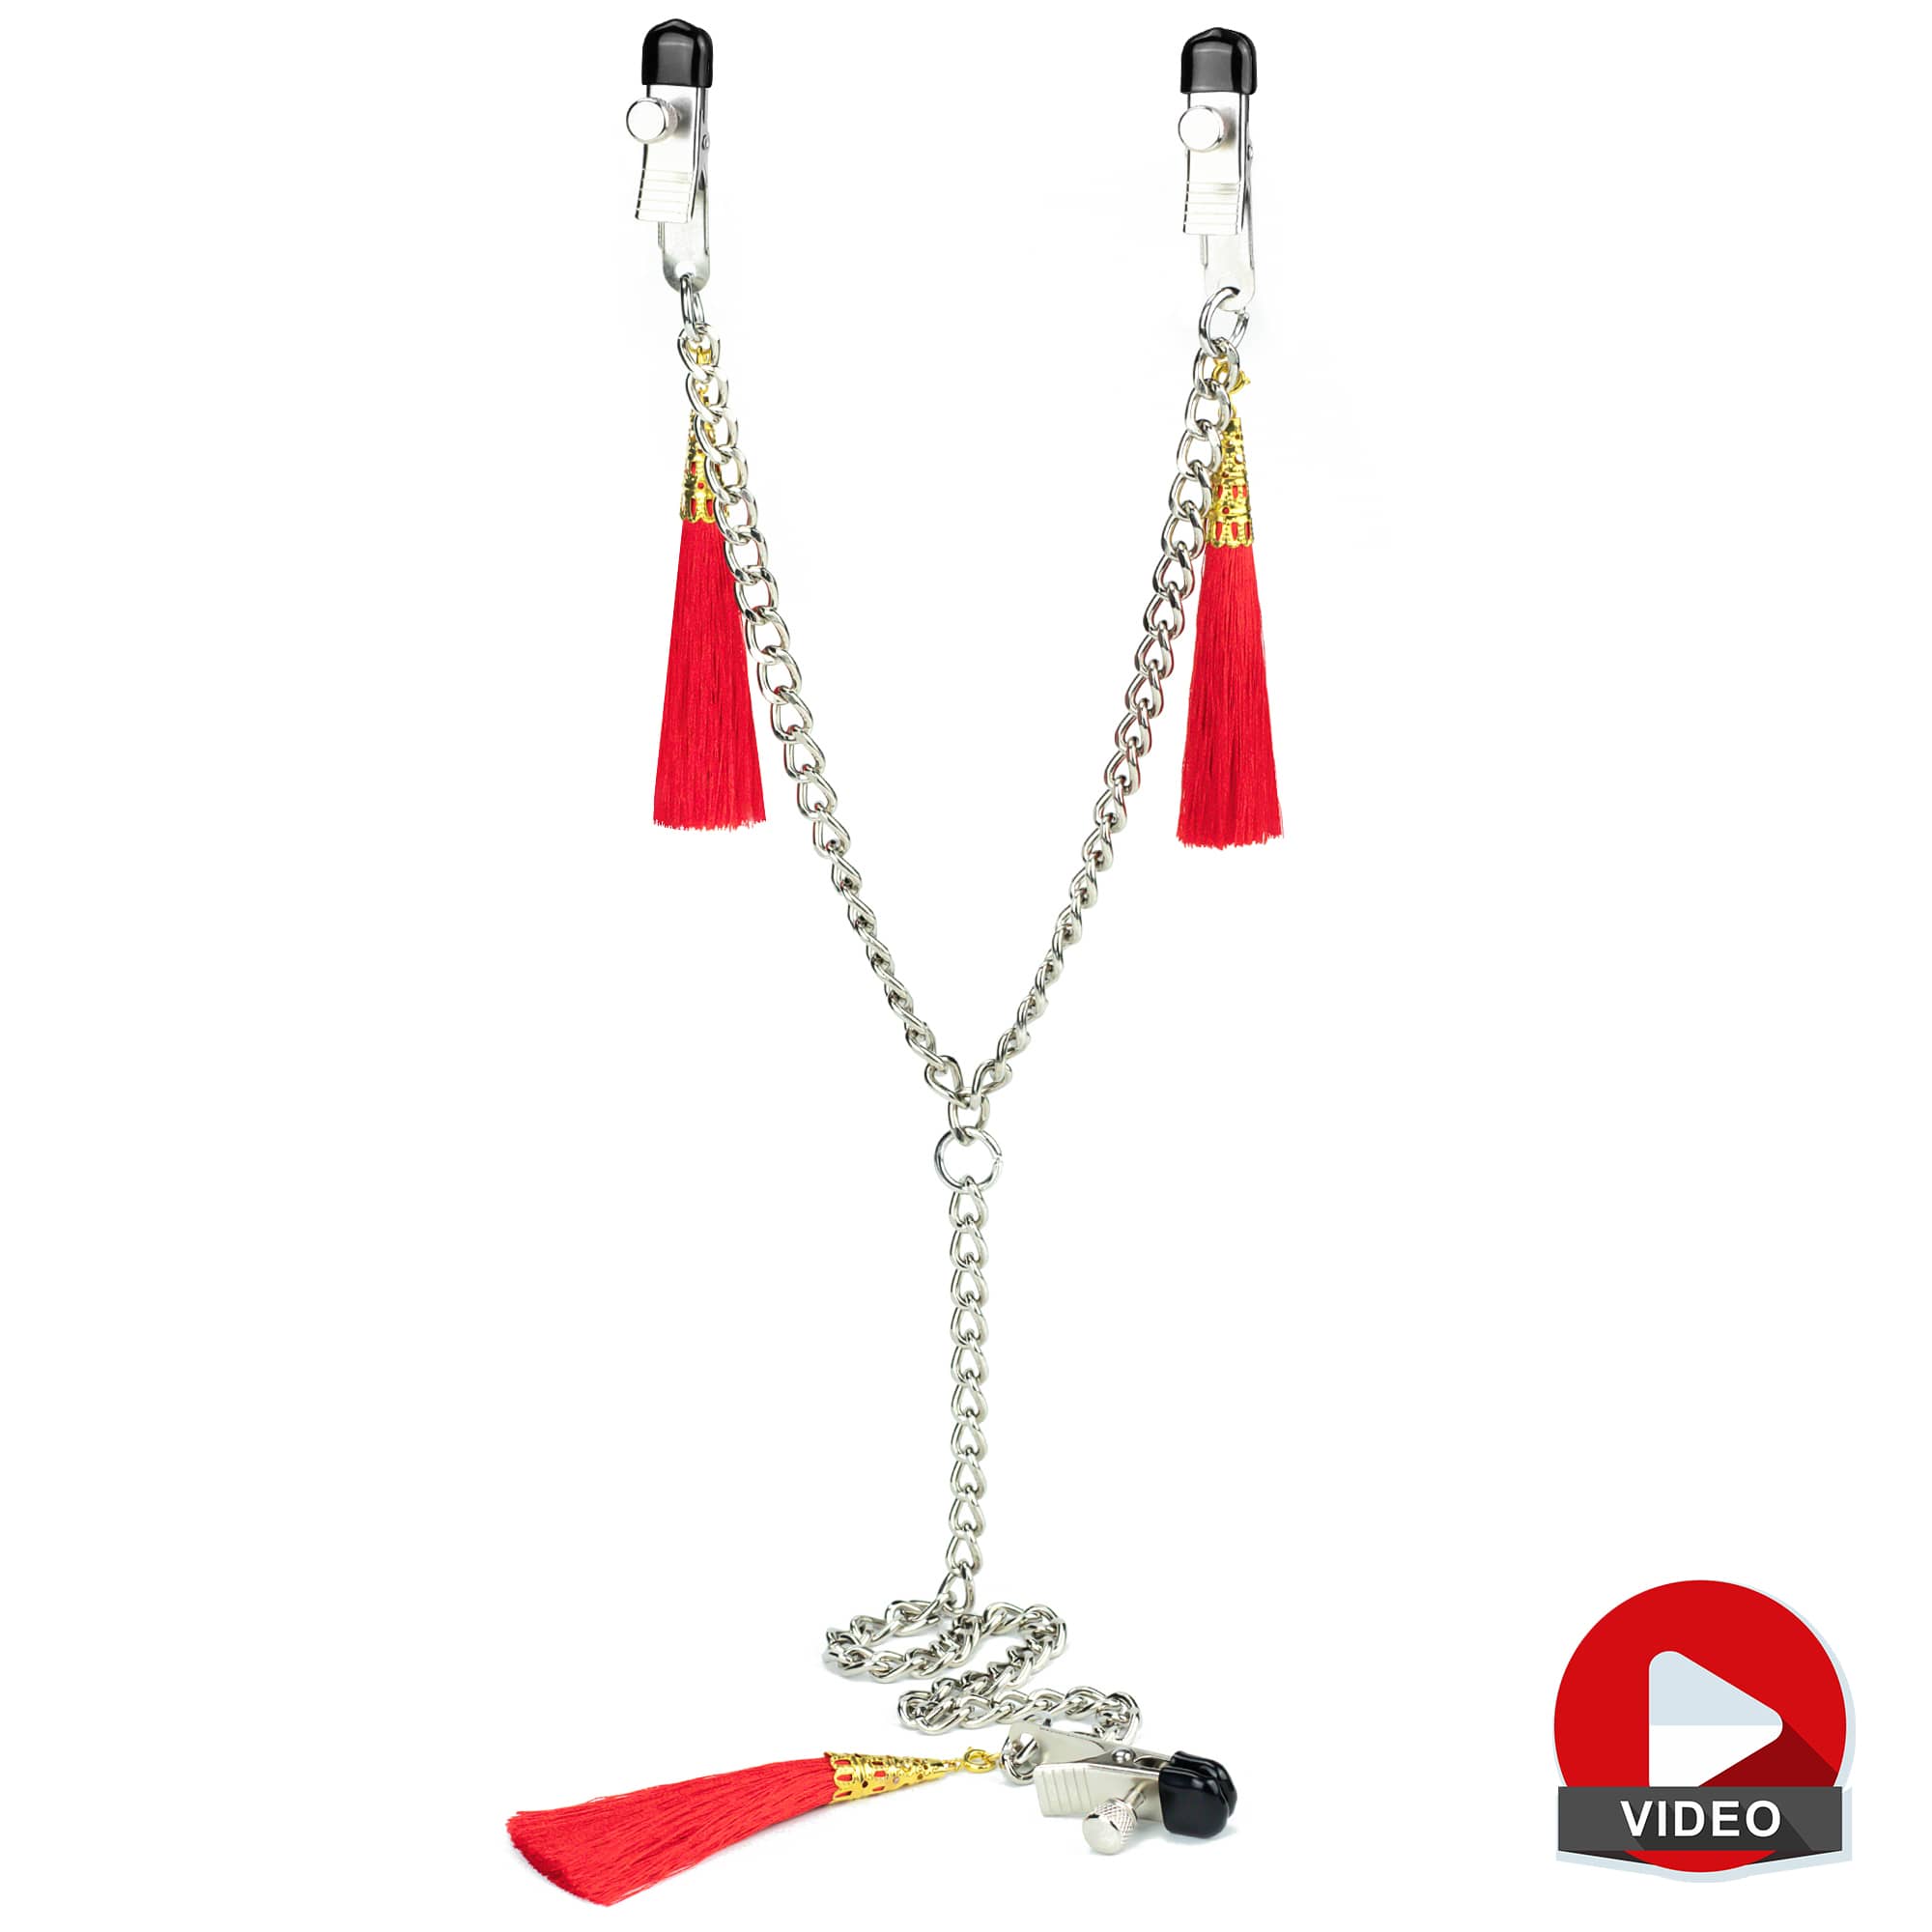 The nipple clit tassel clamp with chain with a video playback logo